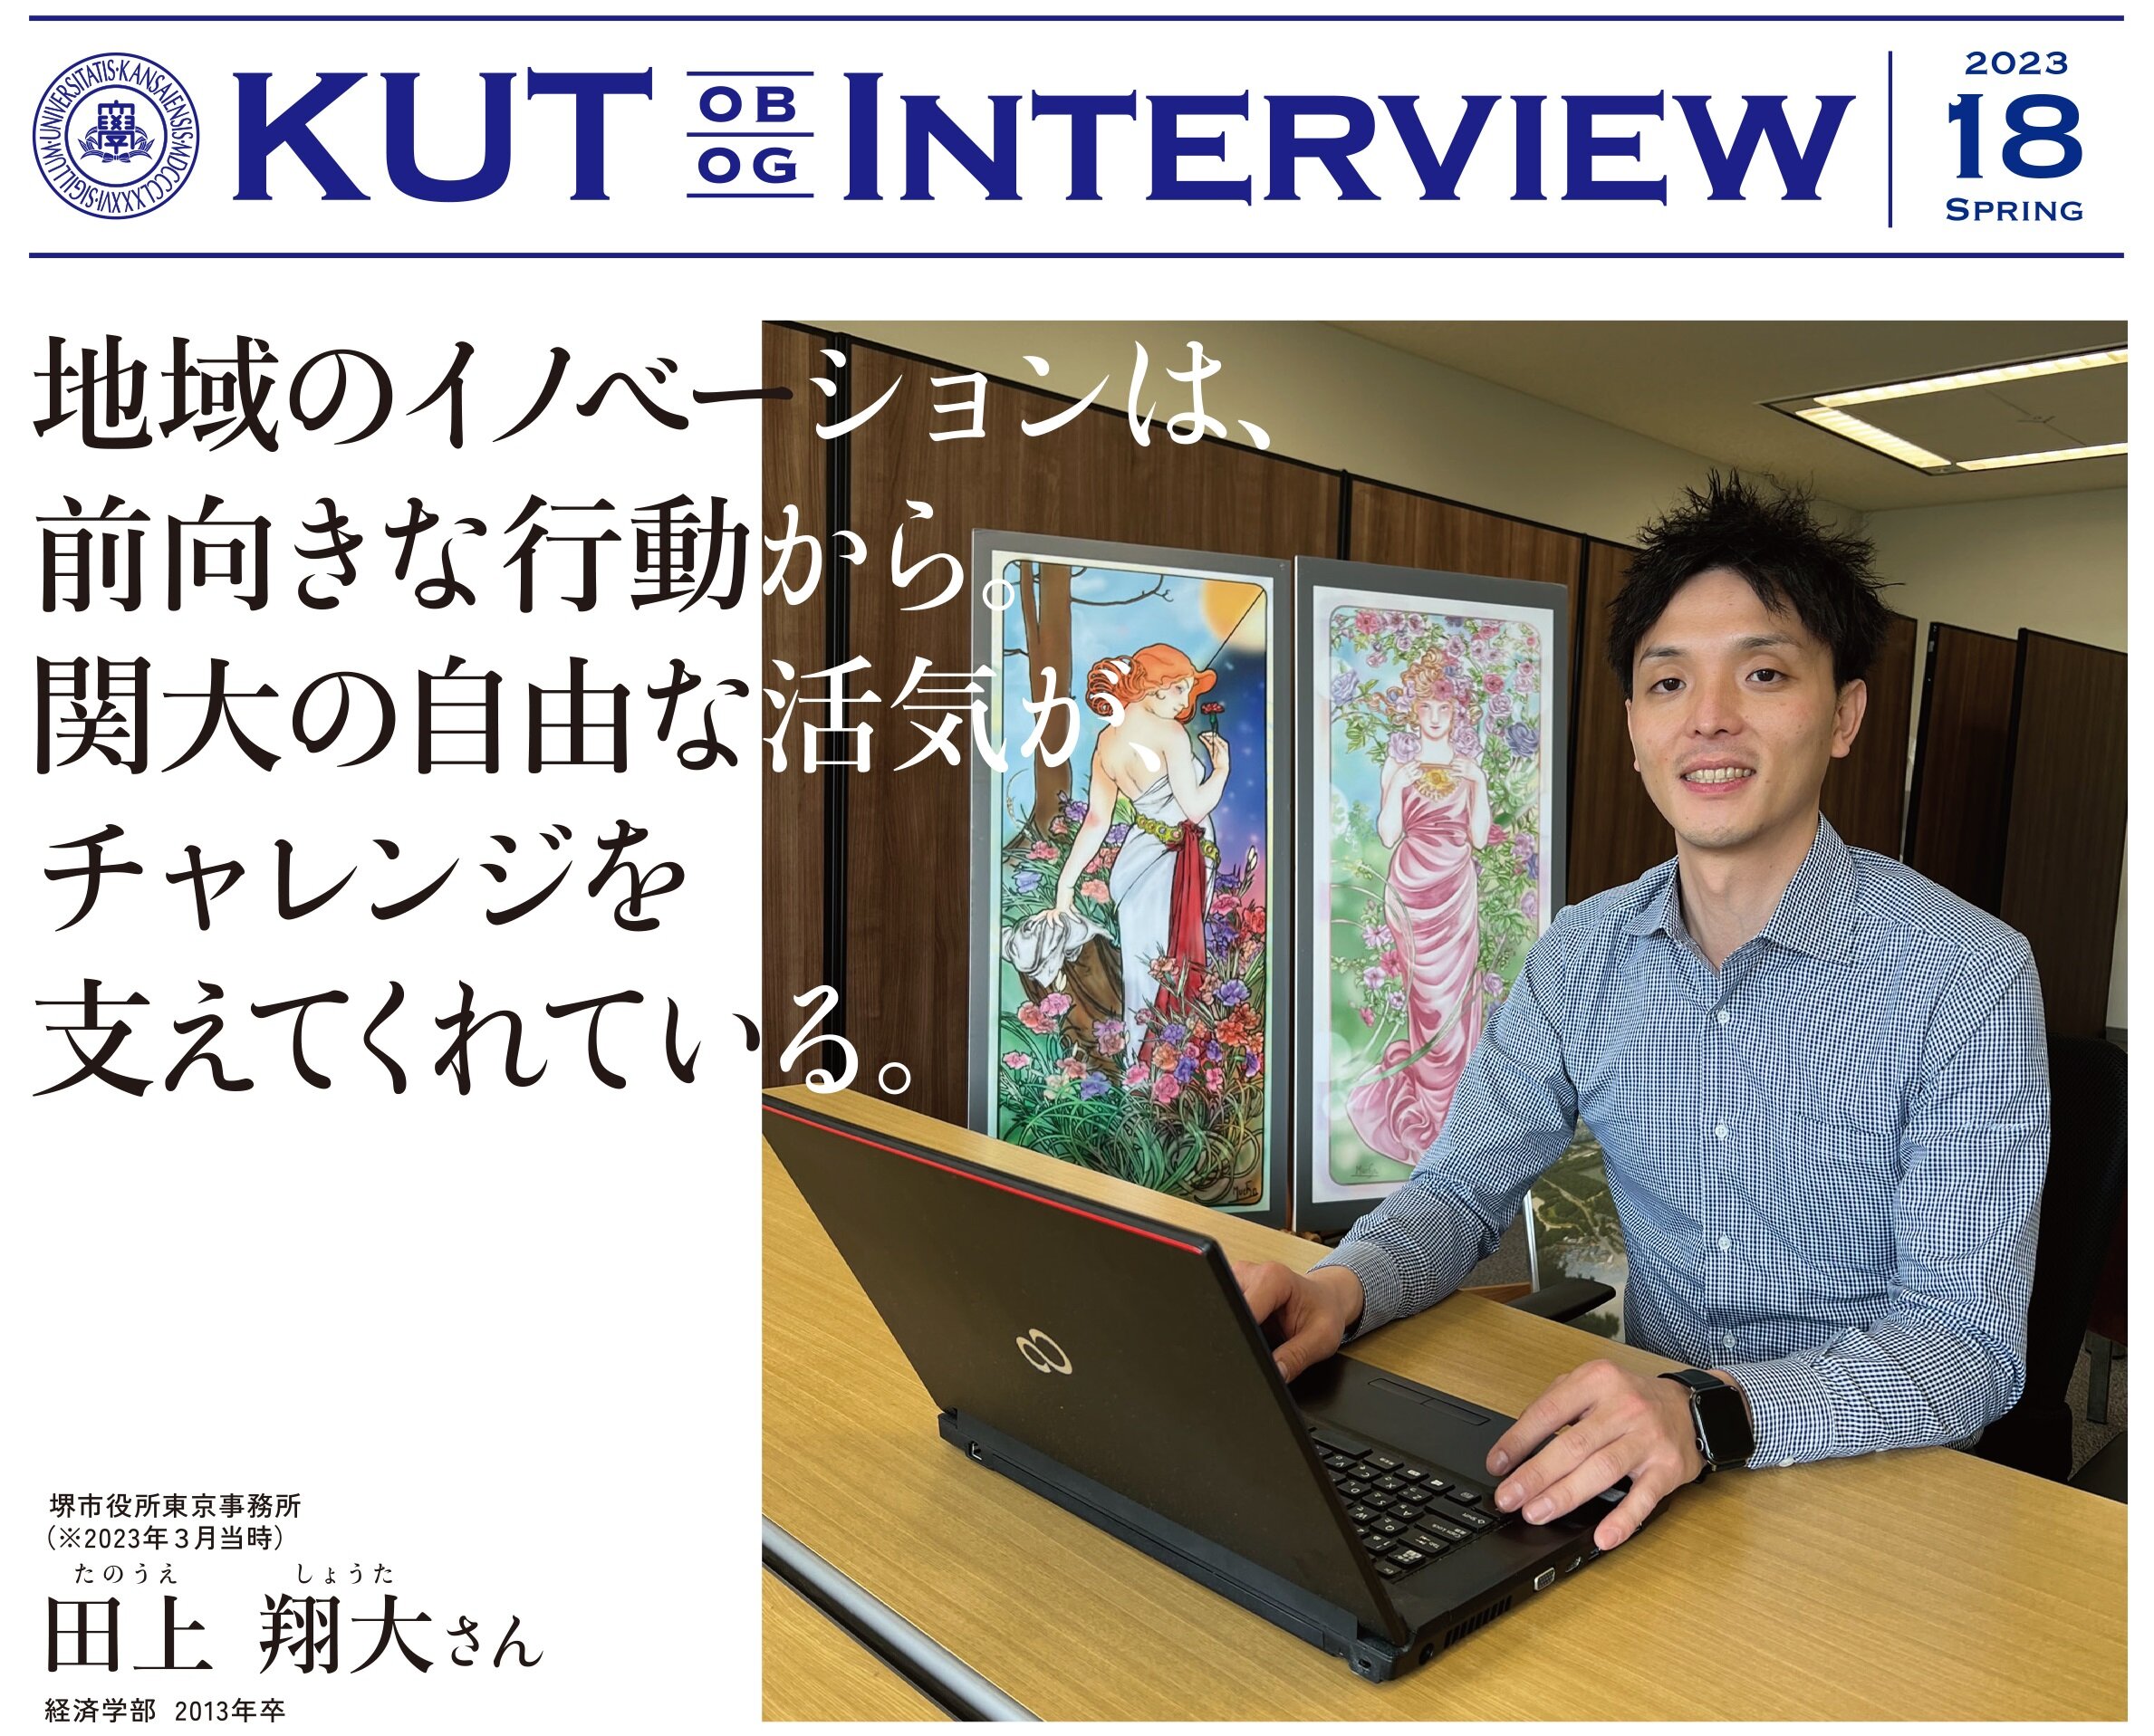 〈KUT INTERVIEW 第１８号〉首都圏で活躍する卒業生をご紹介します！